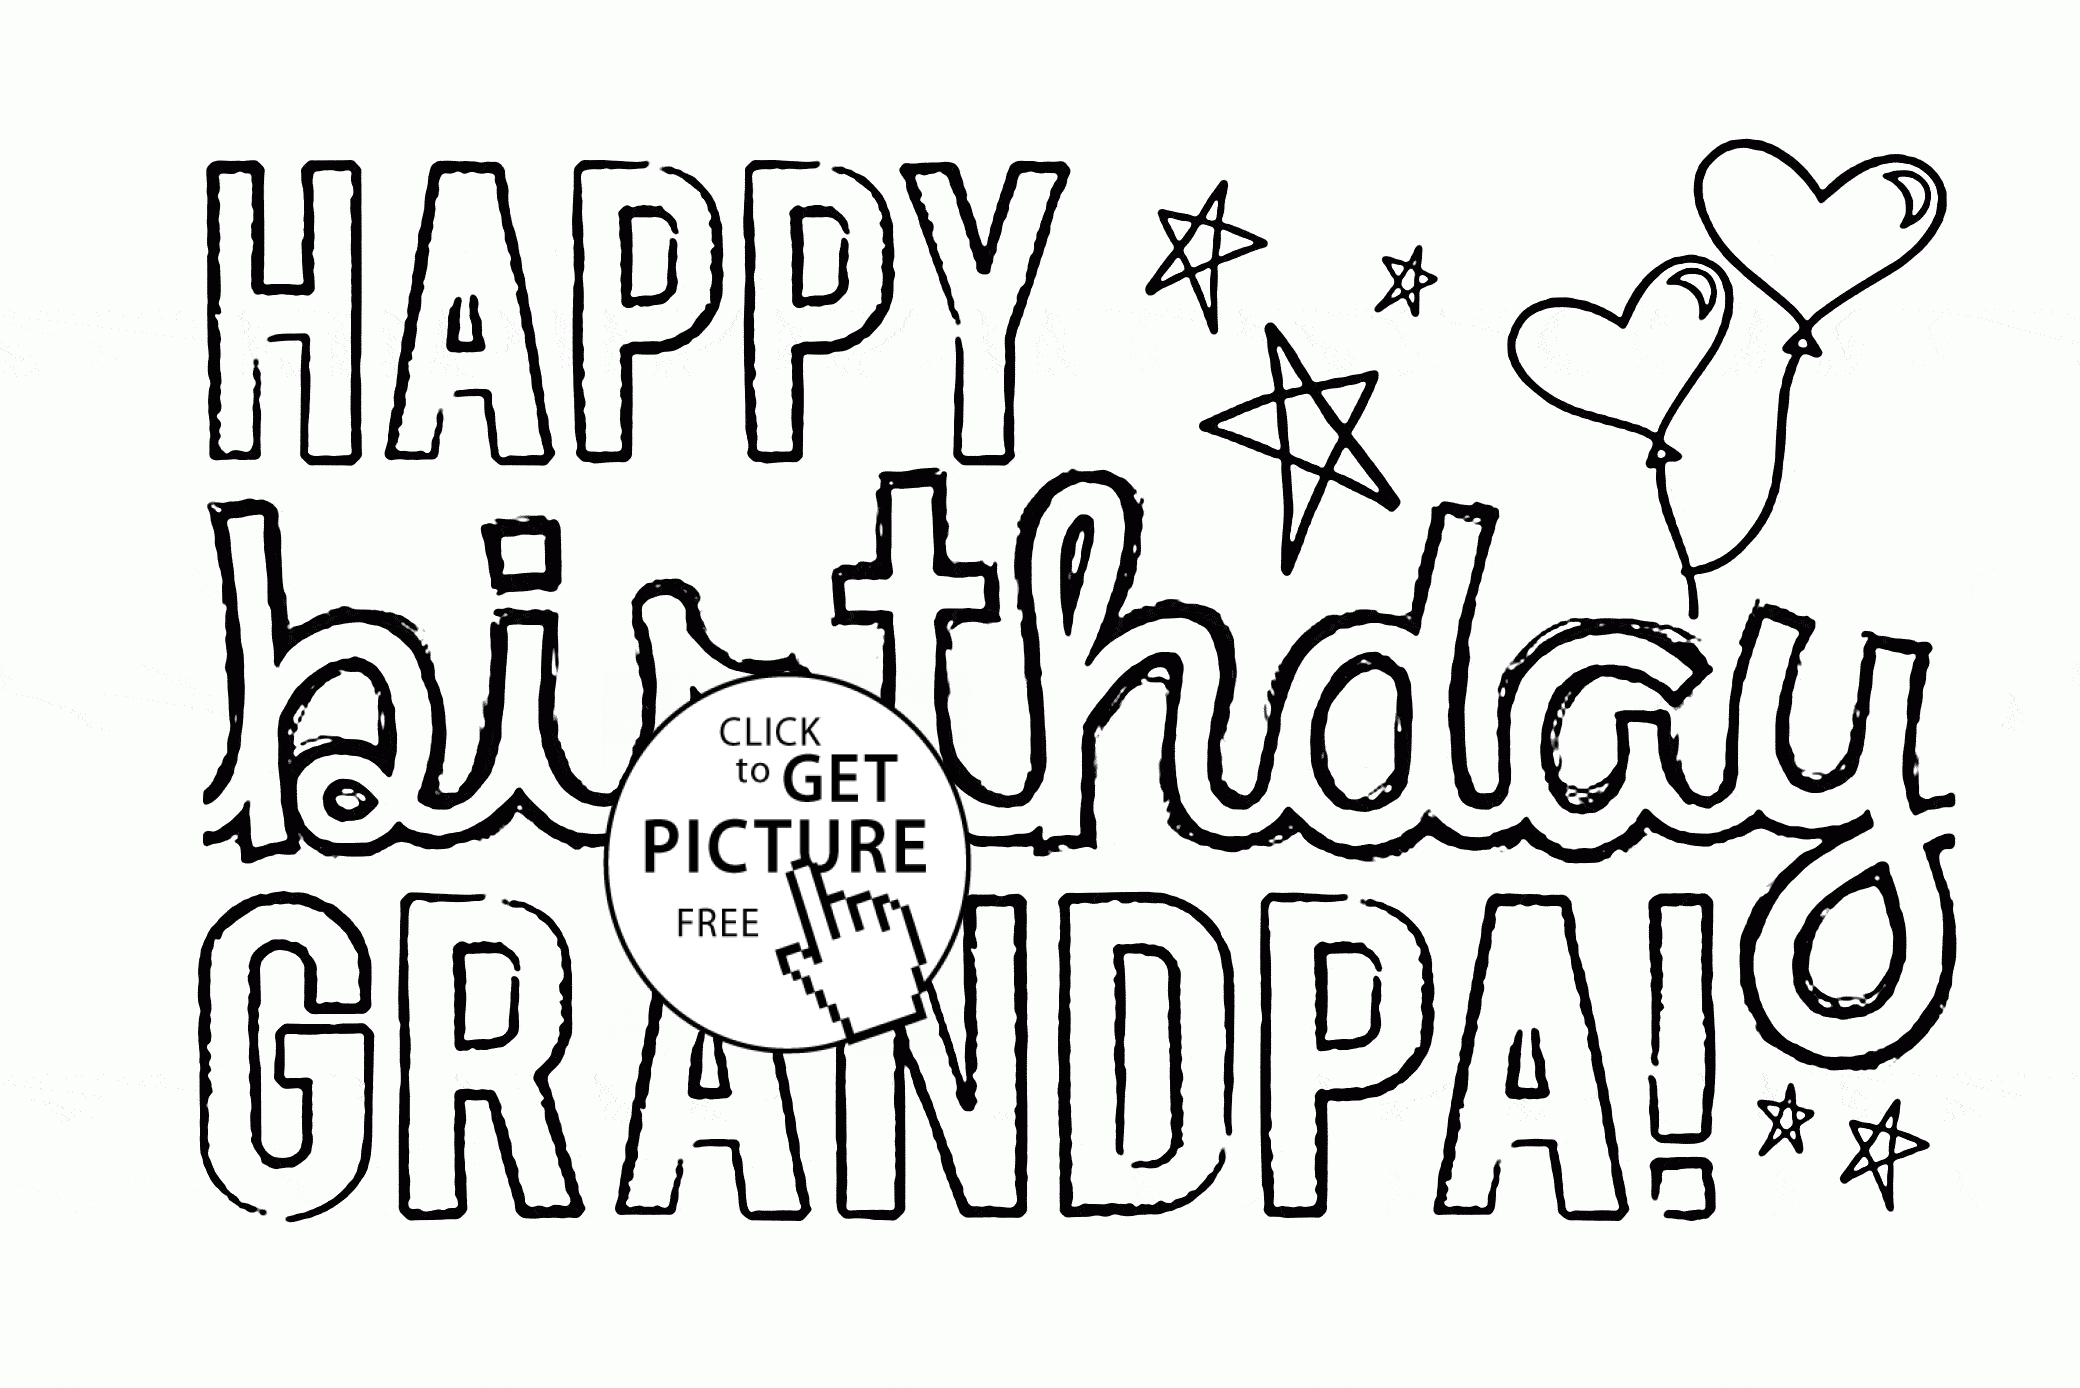 Happy Birthday Grandpa coloring page for kids, holiday coloring ...